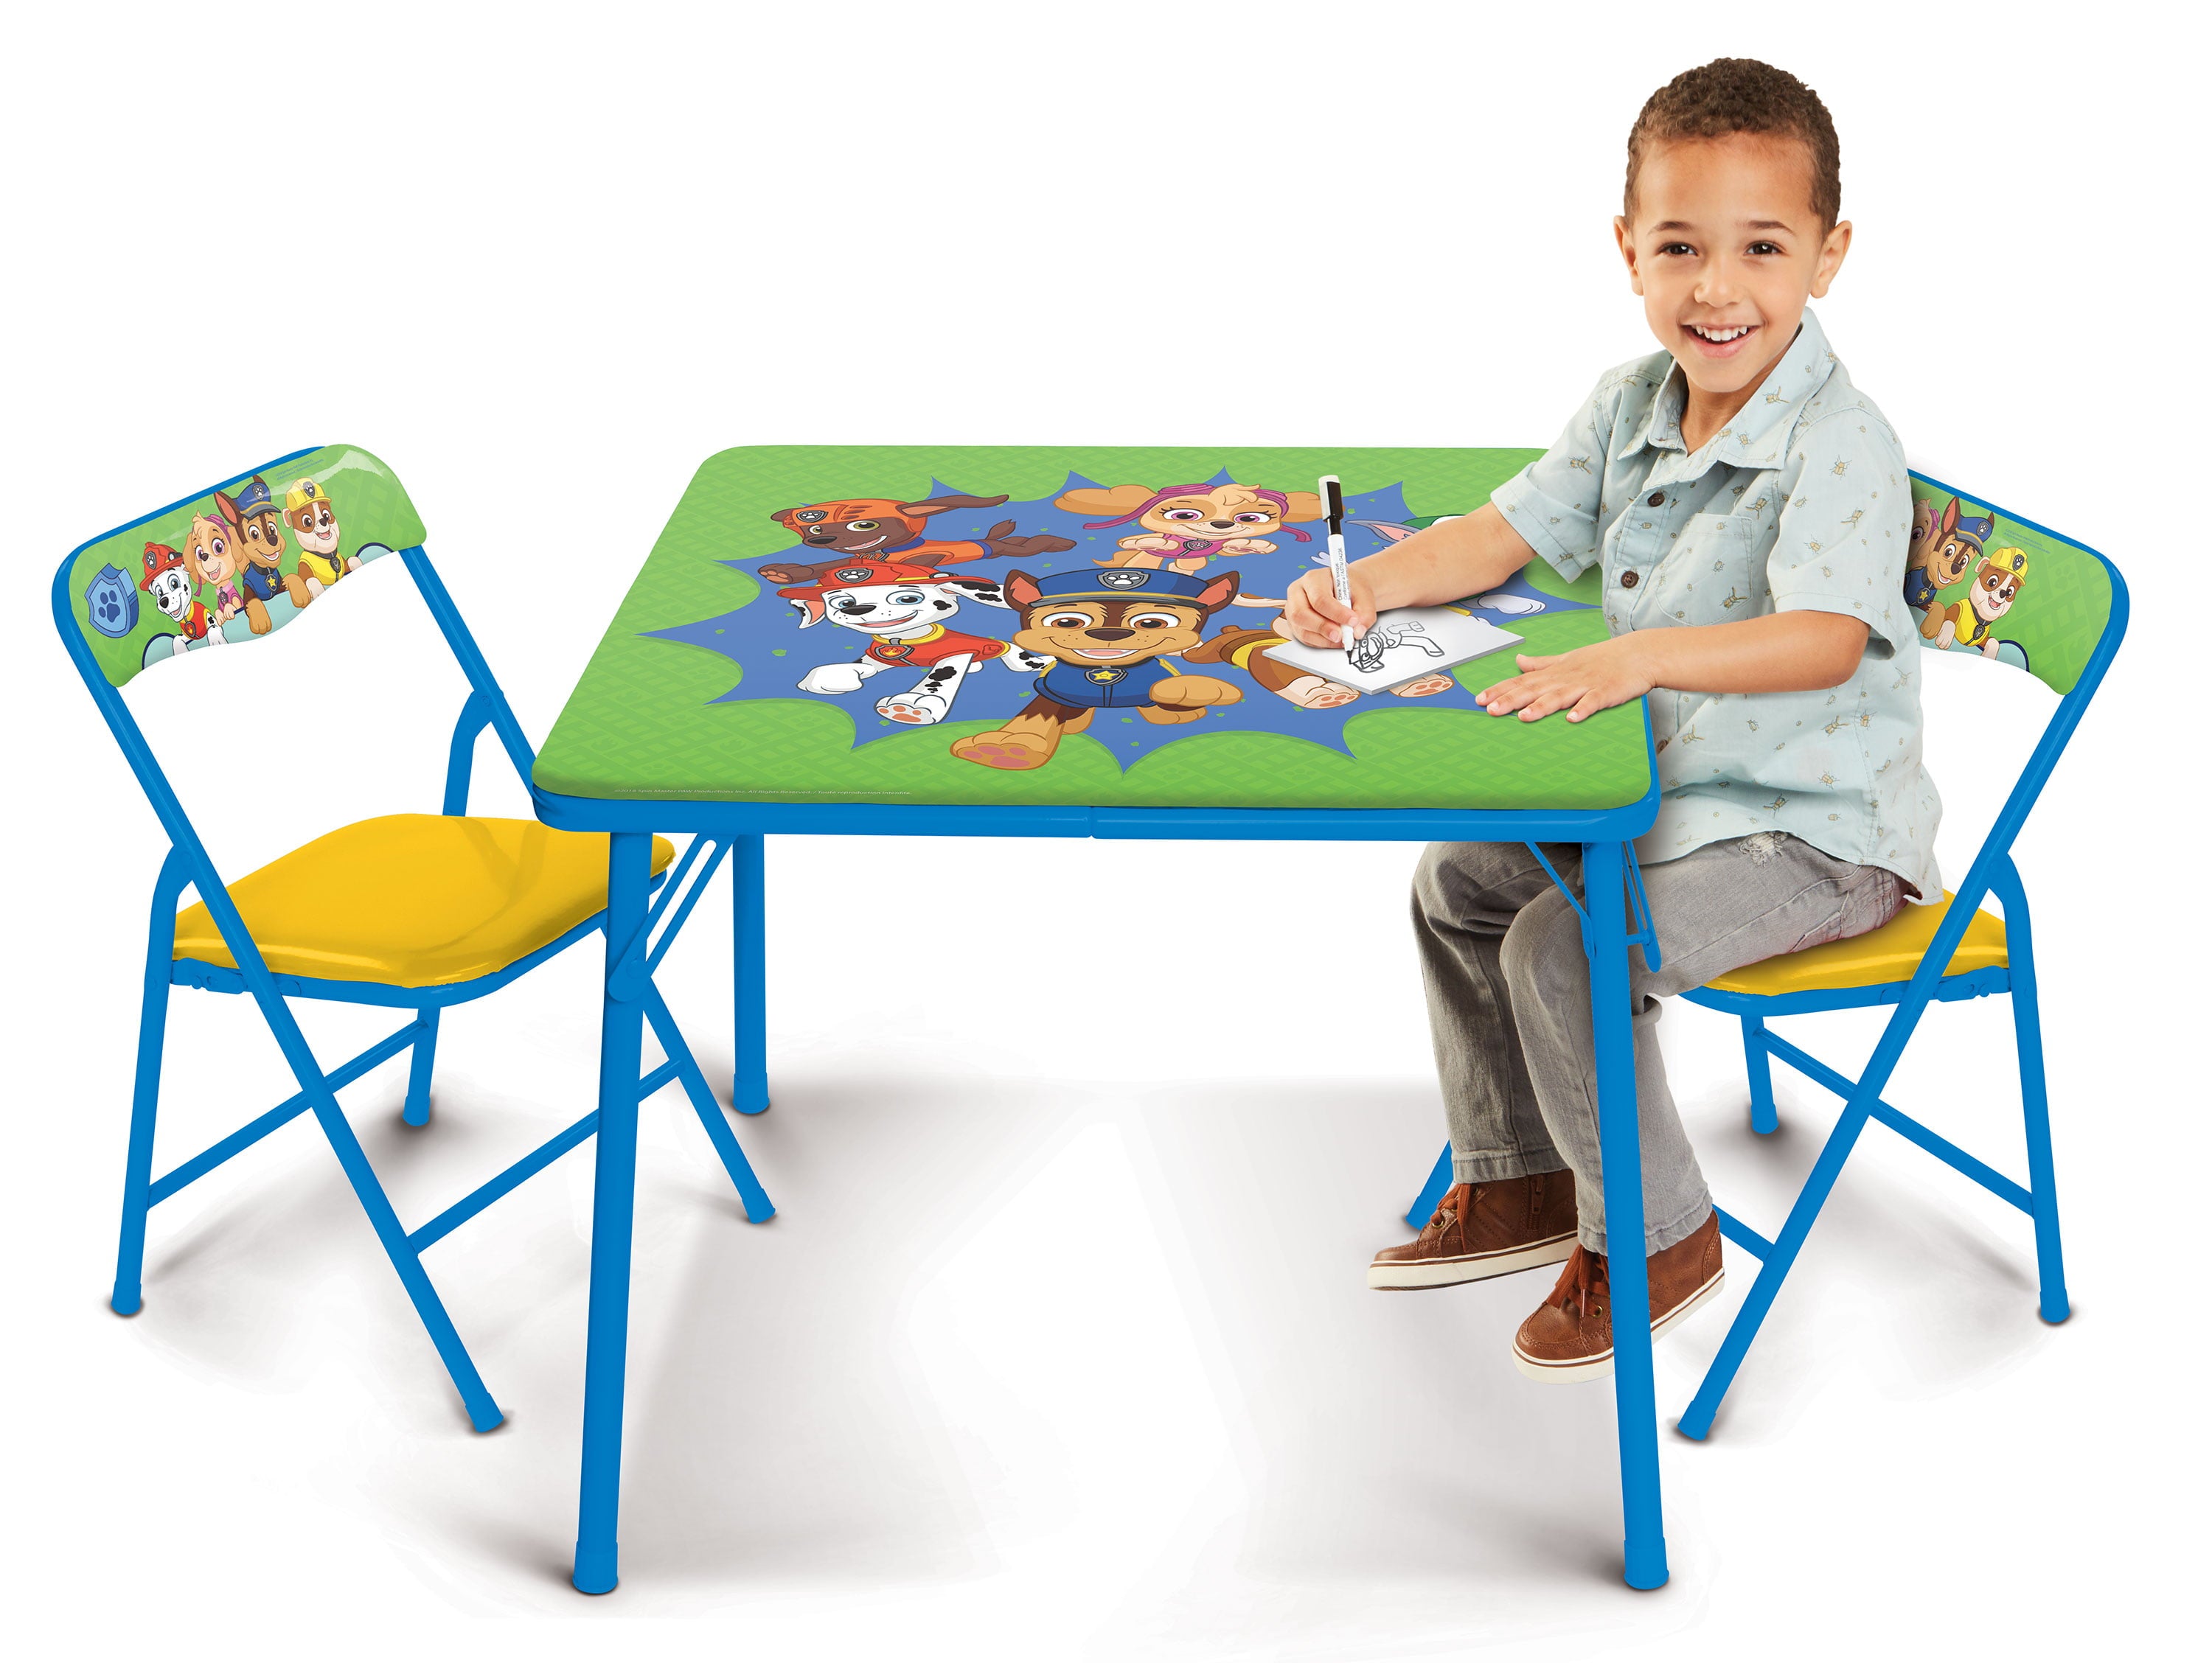 PAW Patrol Kids Erasable Activity Table Includes 2 Chairs with Safety Lock, Non-Skid Rubber Feet & Padded Seats (Green/Yellow)